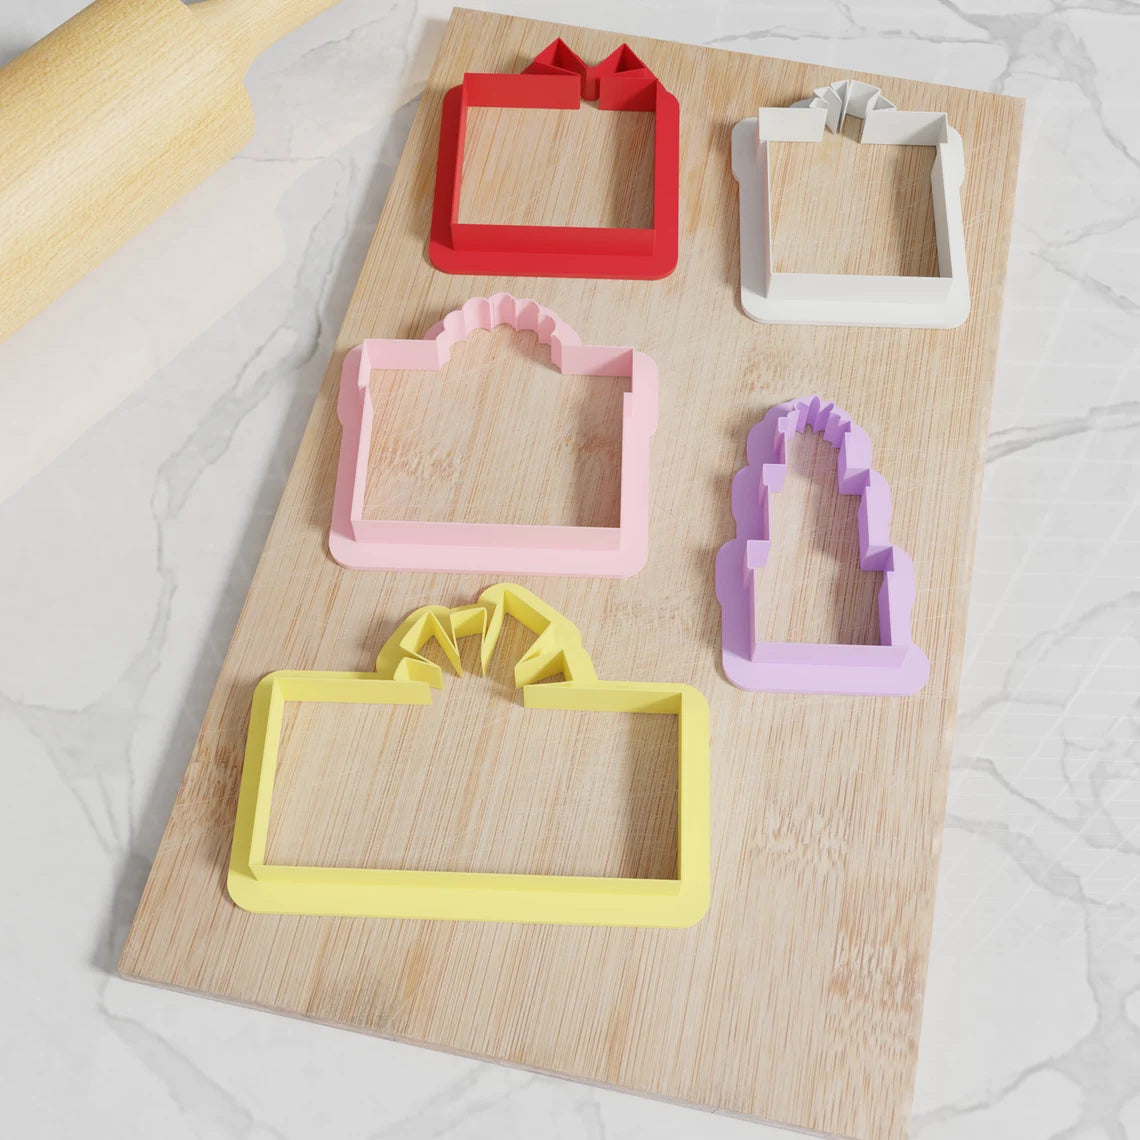 Funky Modern Christmas Present Cookie Cutters. 5 Modern Christmas Present Cookie Cutters From 3 Inch to 8 Inch Height